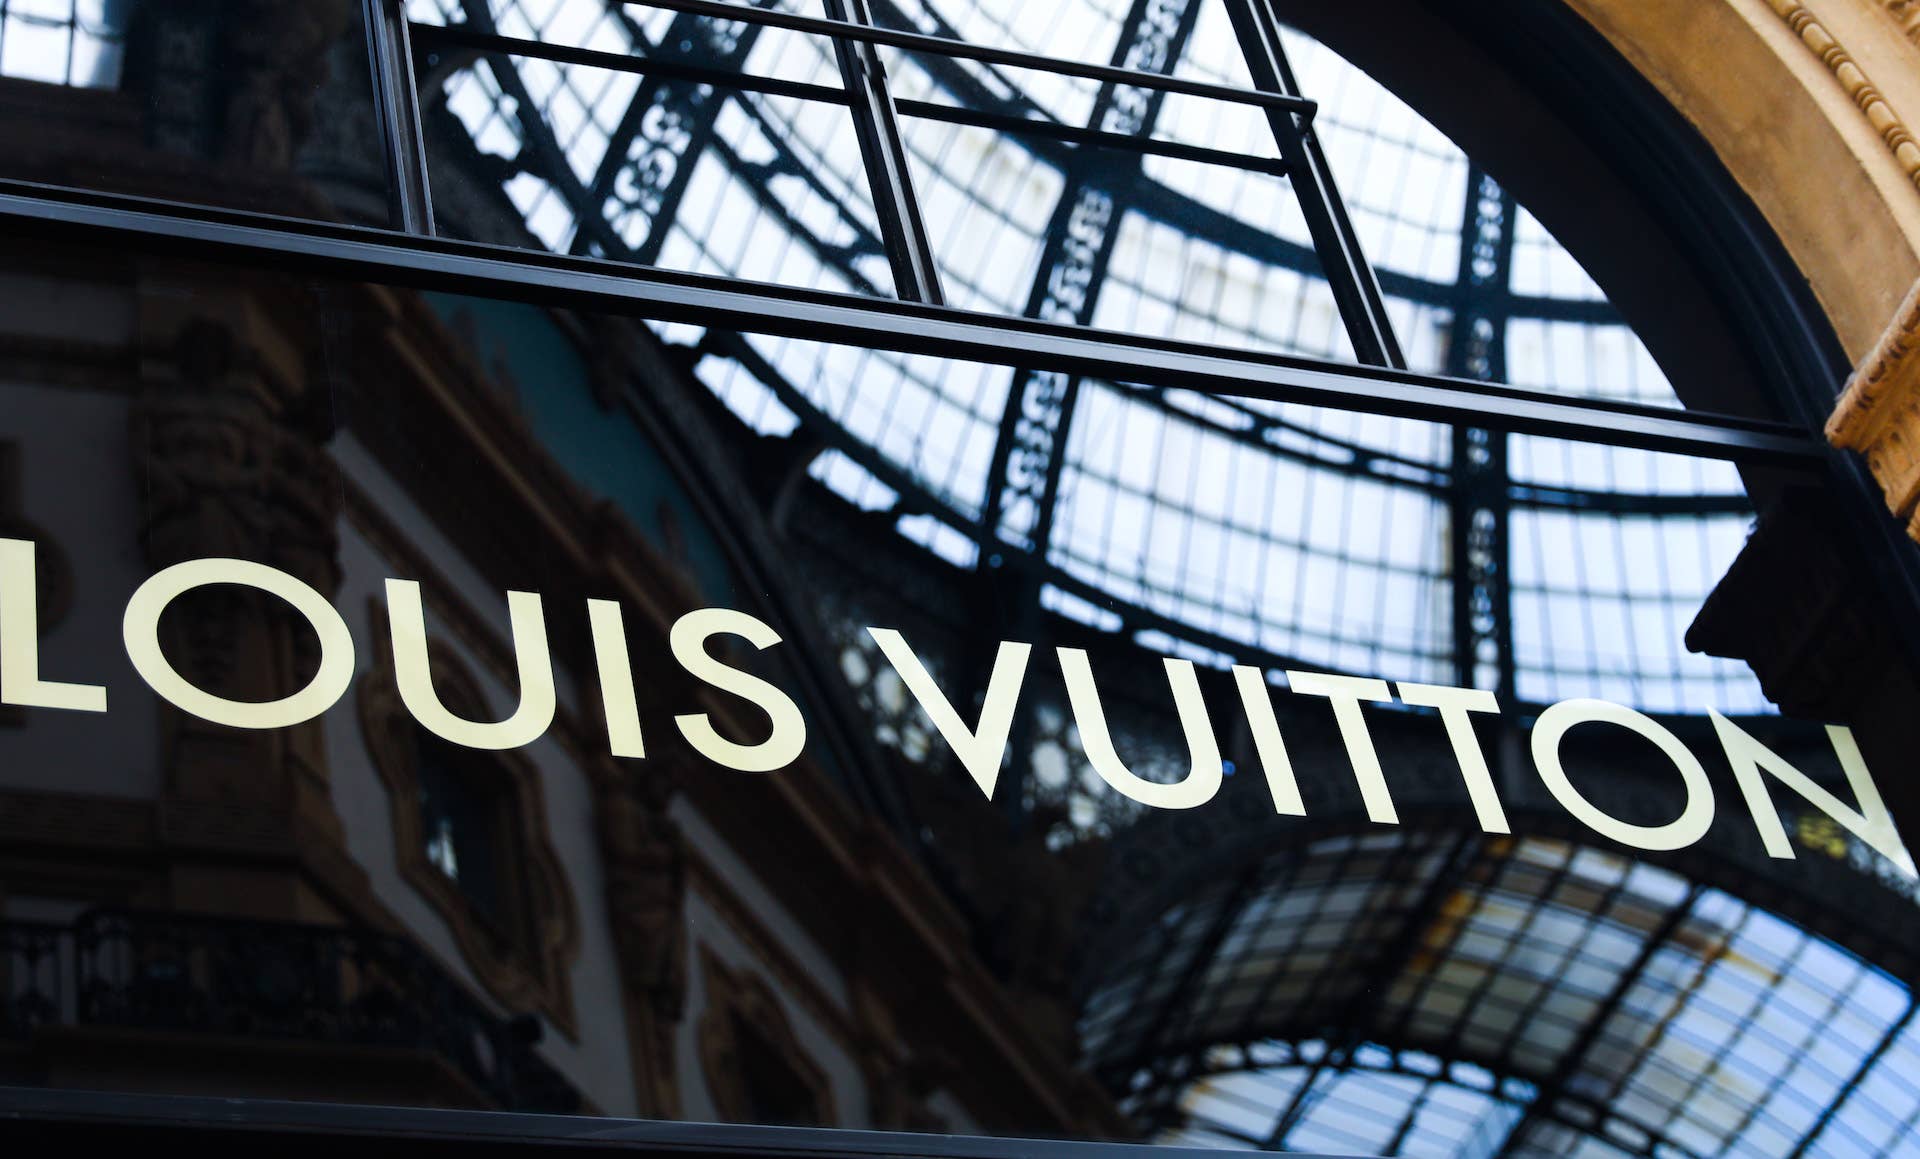 Kering and LVMH Release Statements Follow PETA Allegations of Animal Cruelty